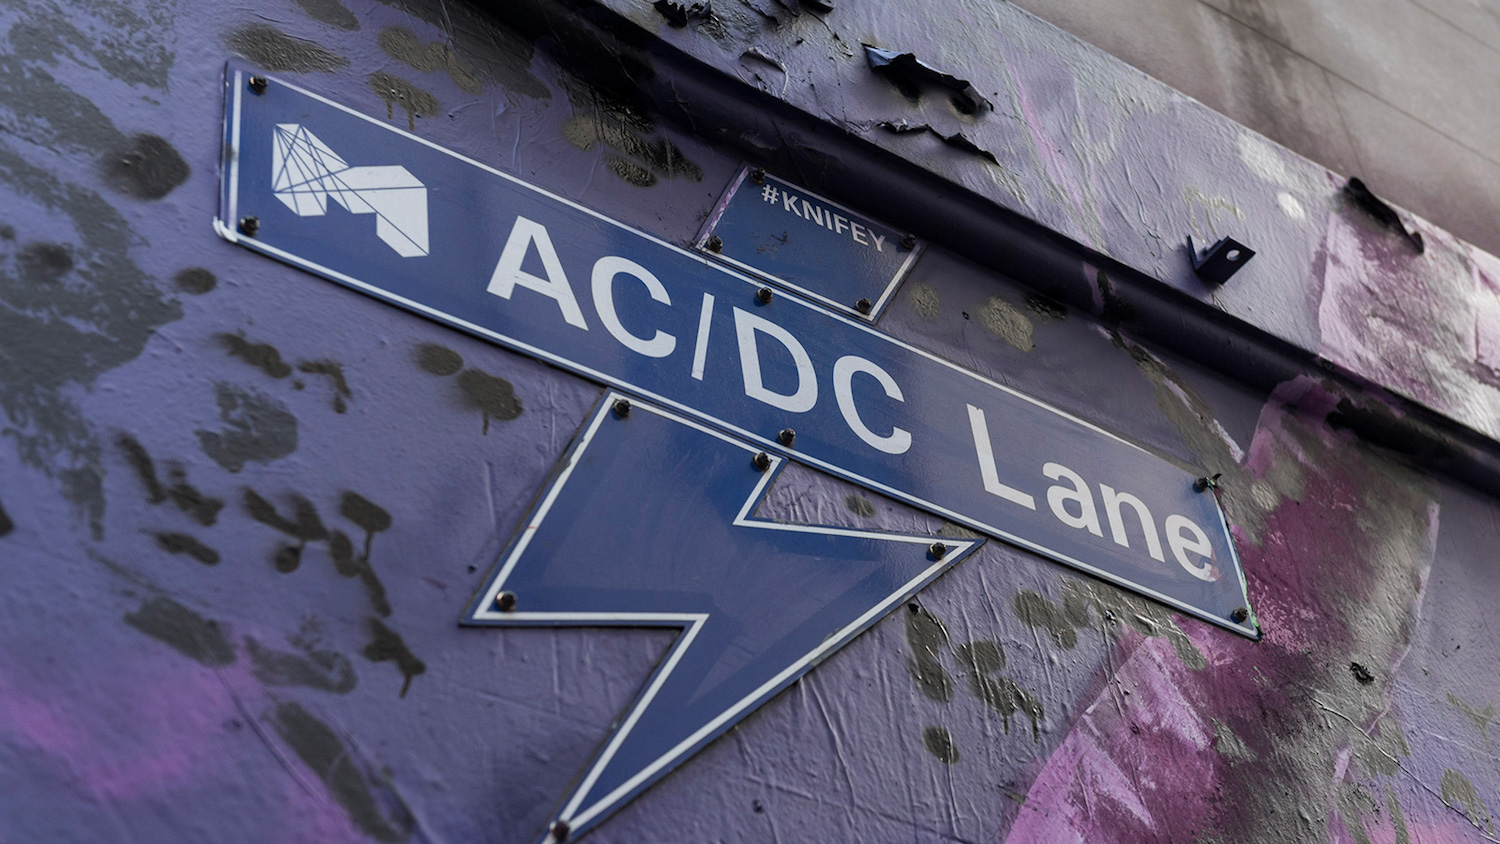 Why is AC/DC Lane in Melbourne and not in Sydney?